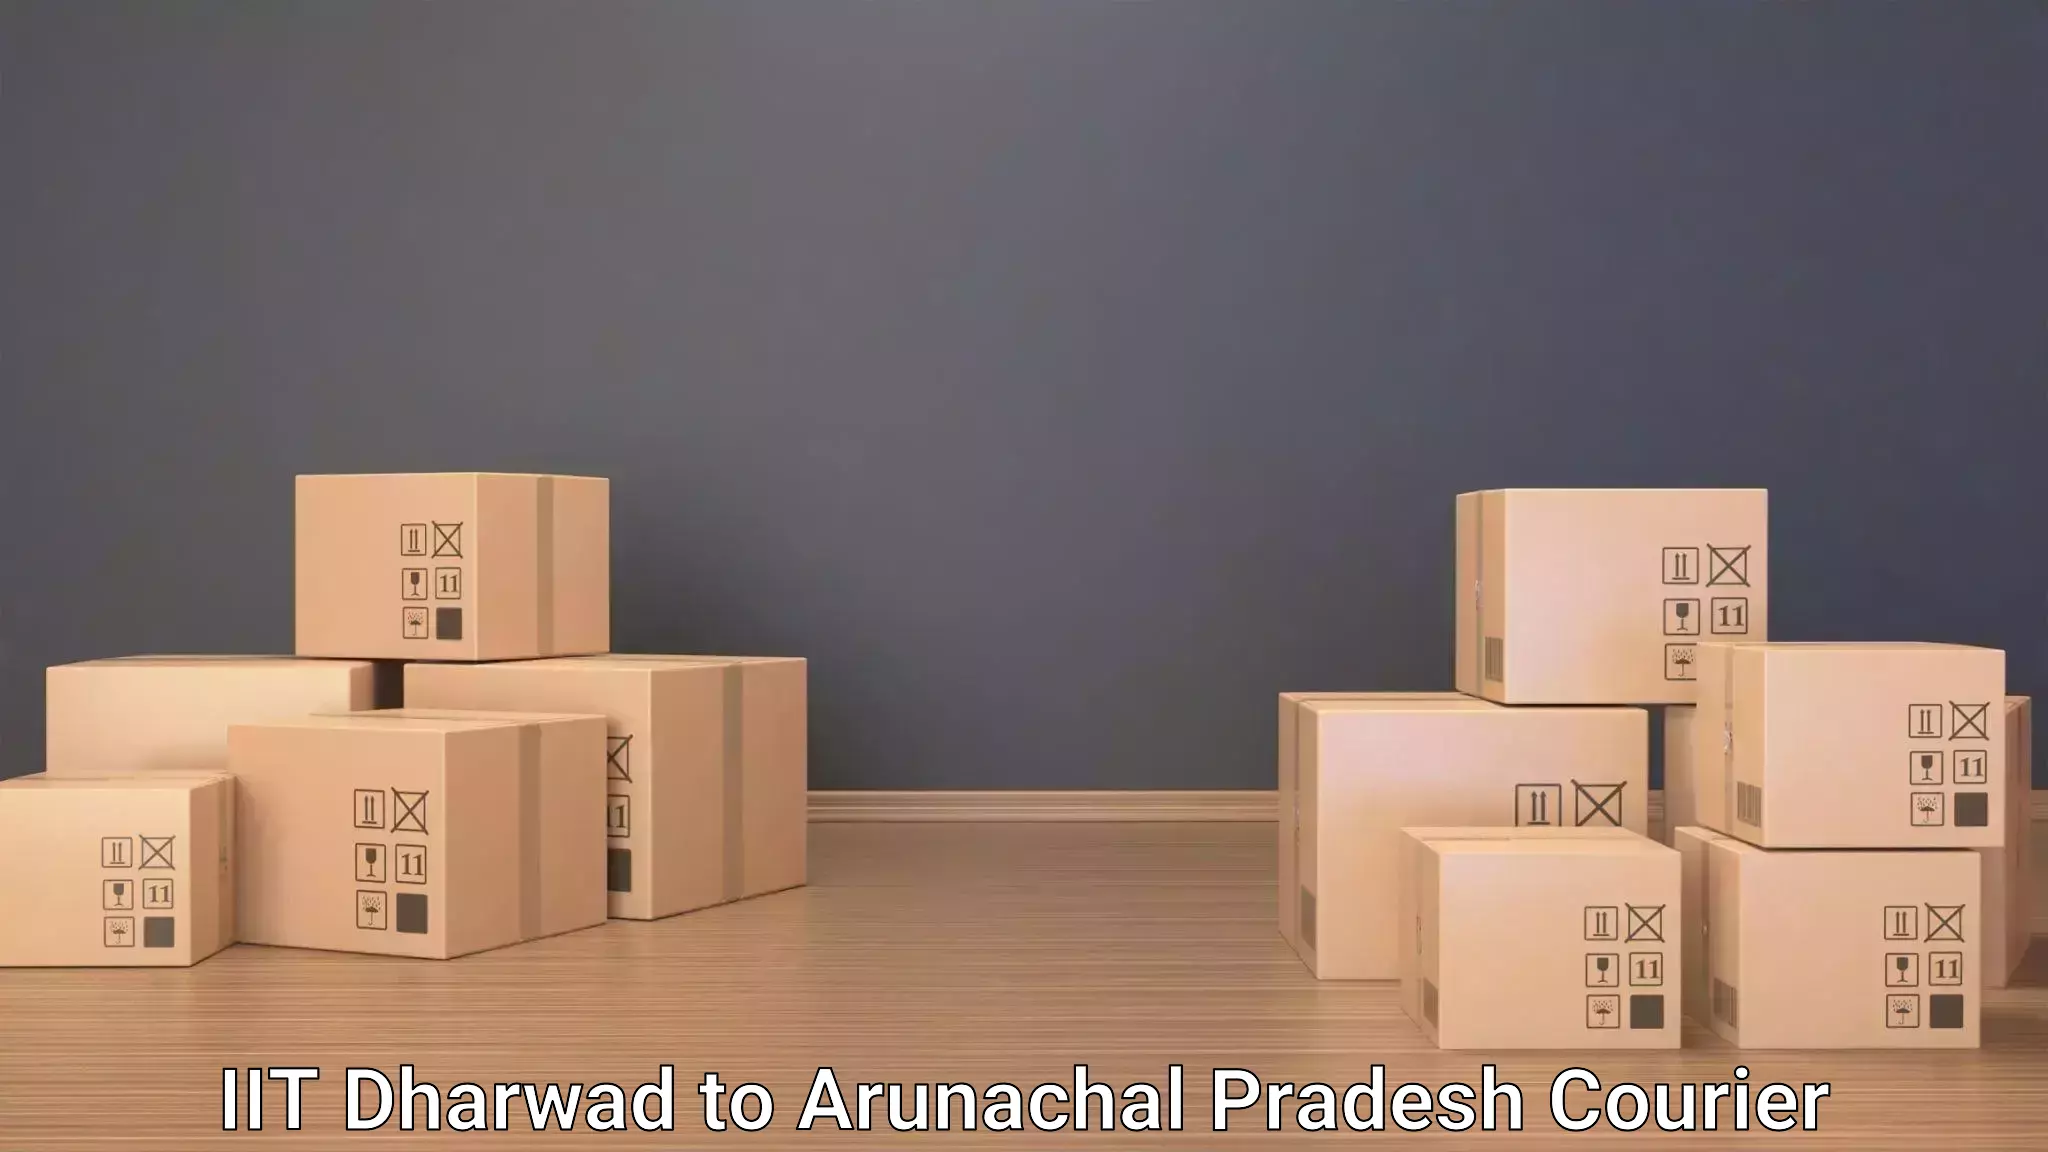 Automated luggage transport IIT Dharwad to Dirang